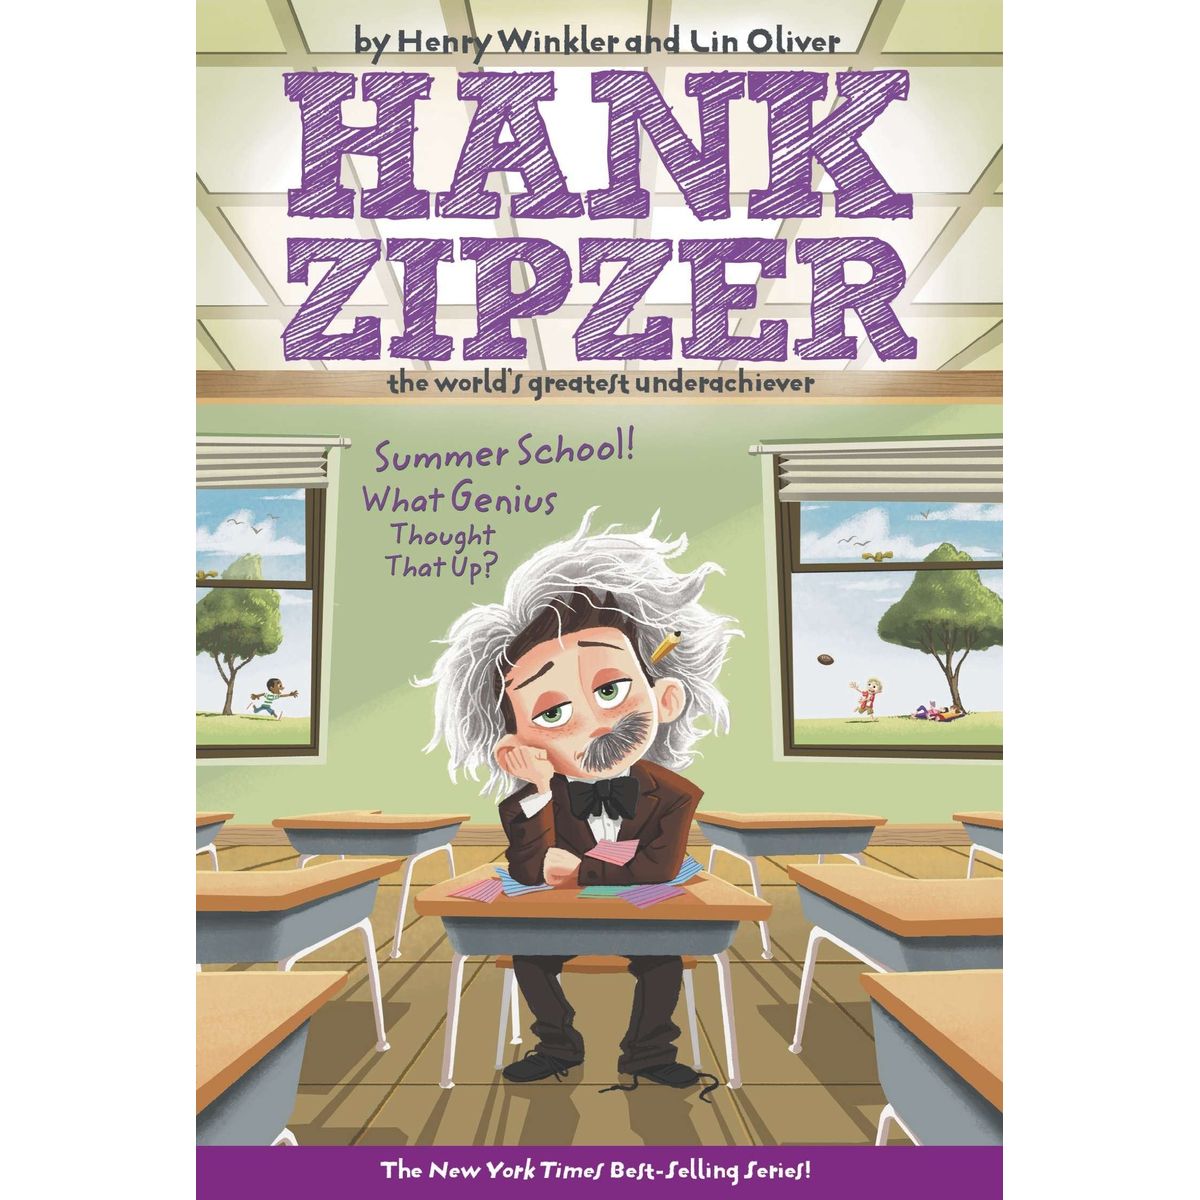 ISBN: 9781406321777 / 140632177X - Hank Zipzer: The World's Greatest Underachiever: Summer School! What Genius Thought Up That? by Henry Winkler and Lin Oliver [2009]